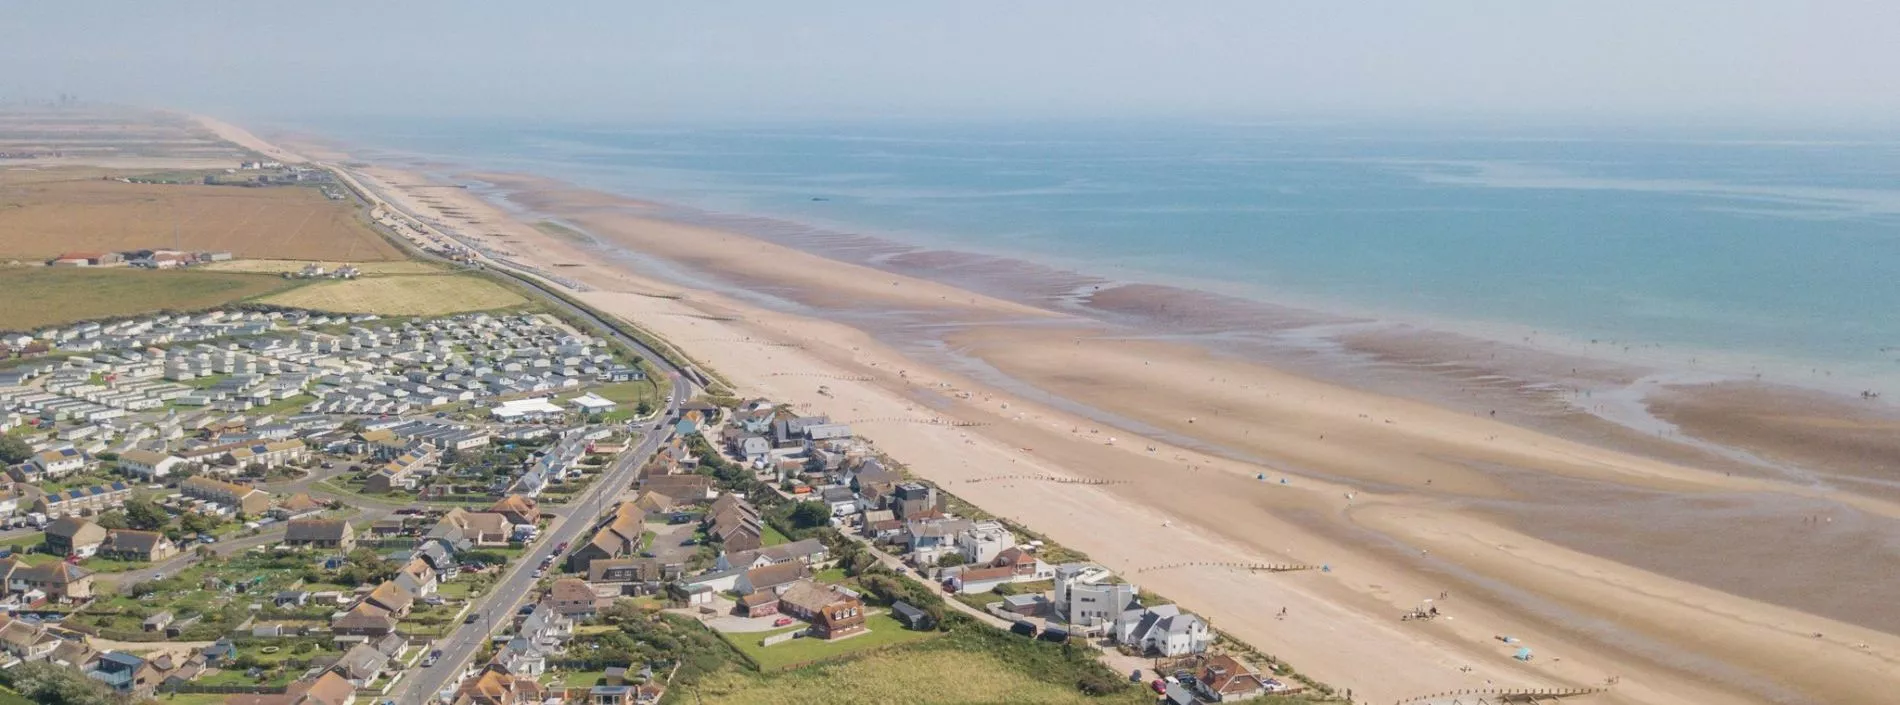 Camber Sands Beach, East Sussex